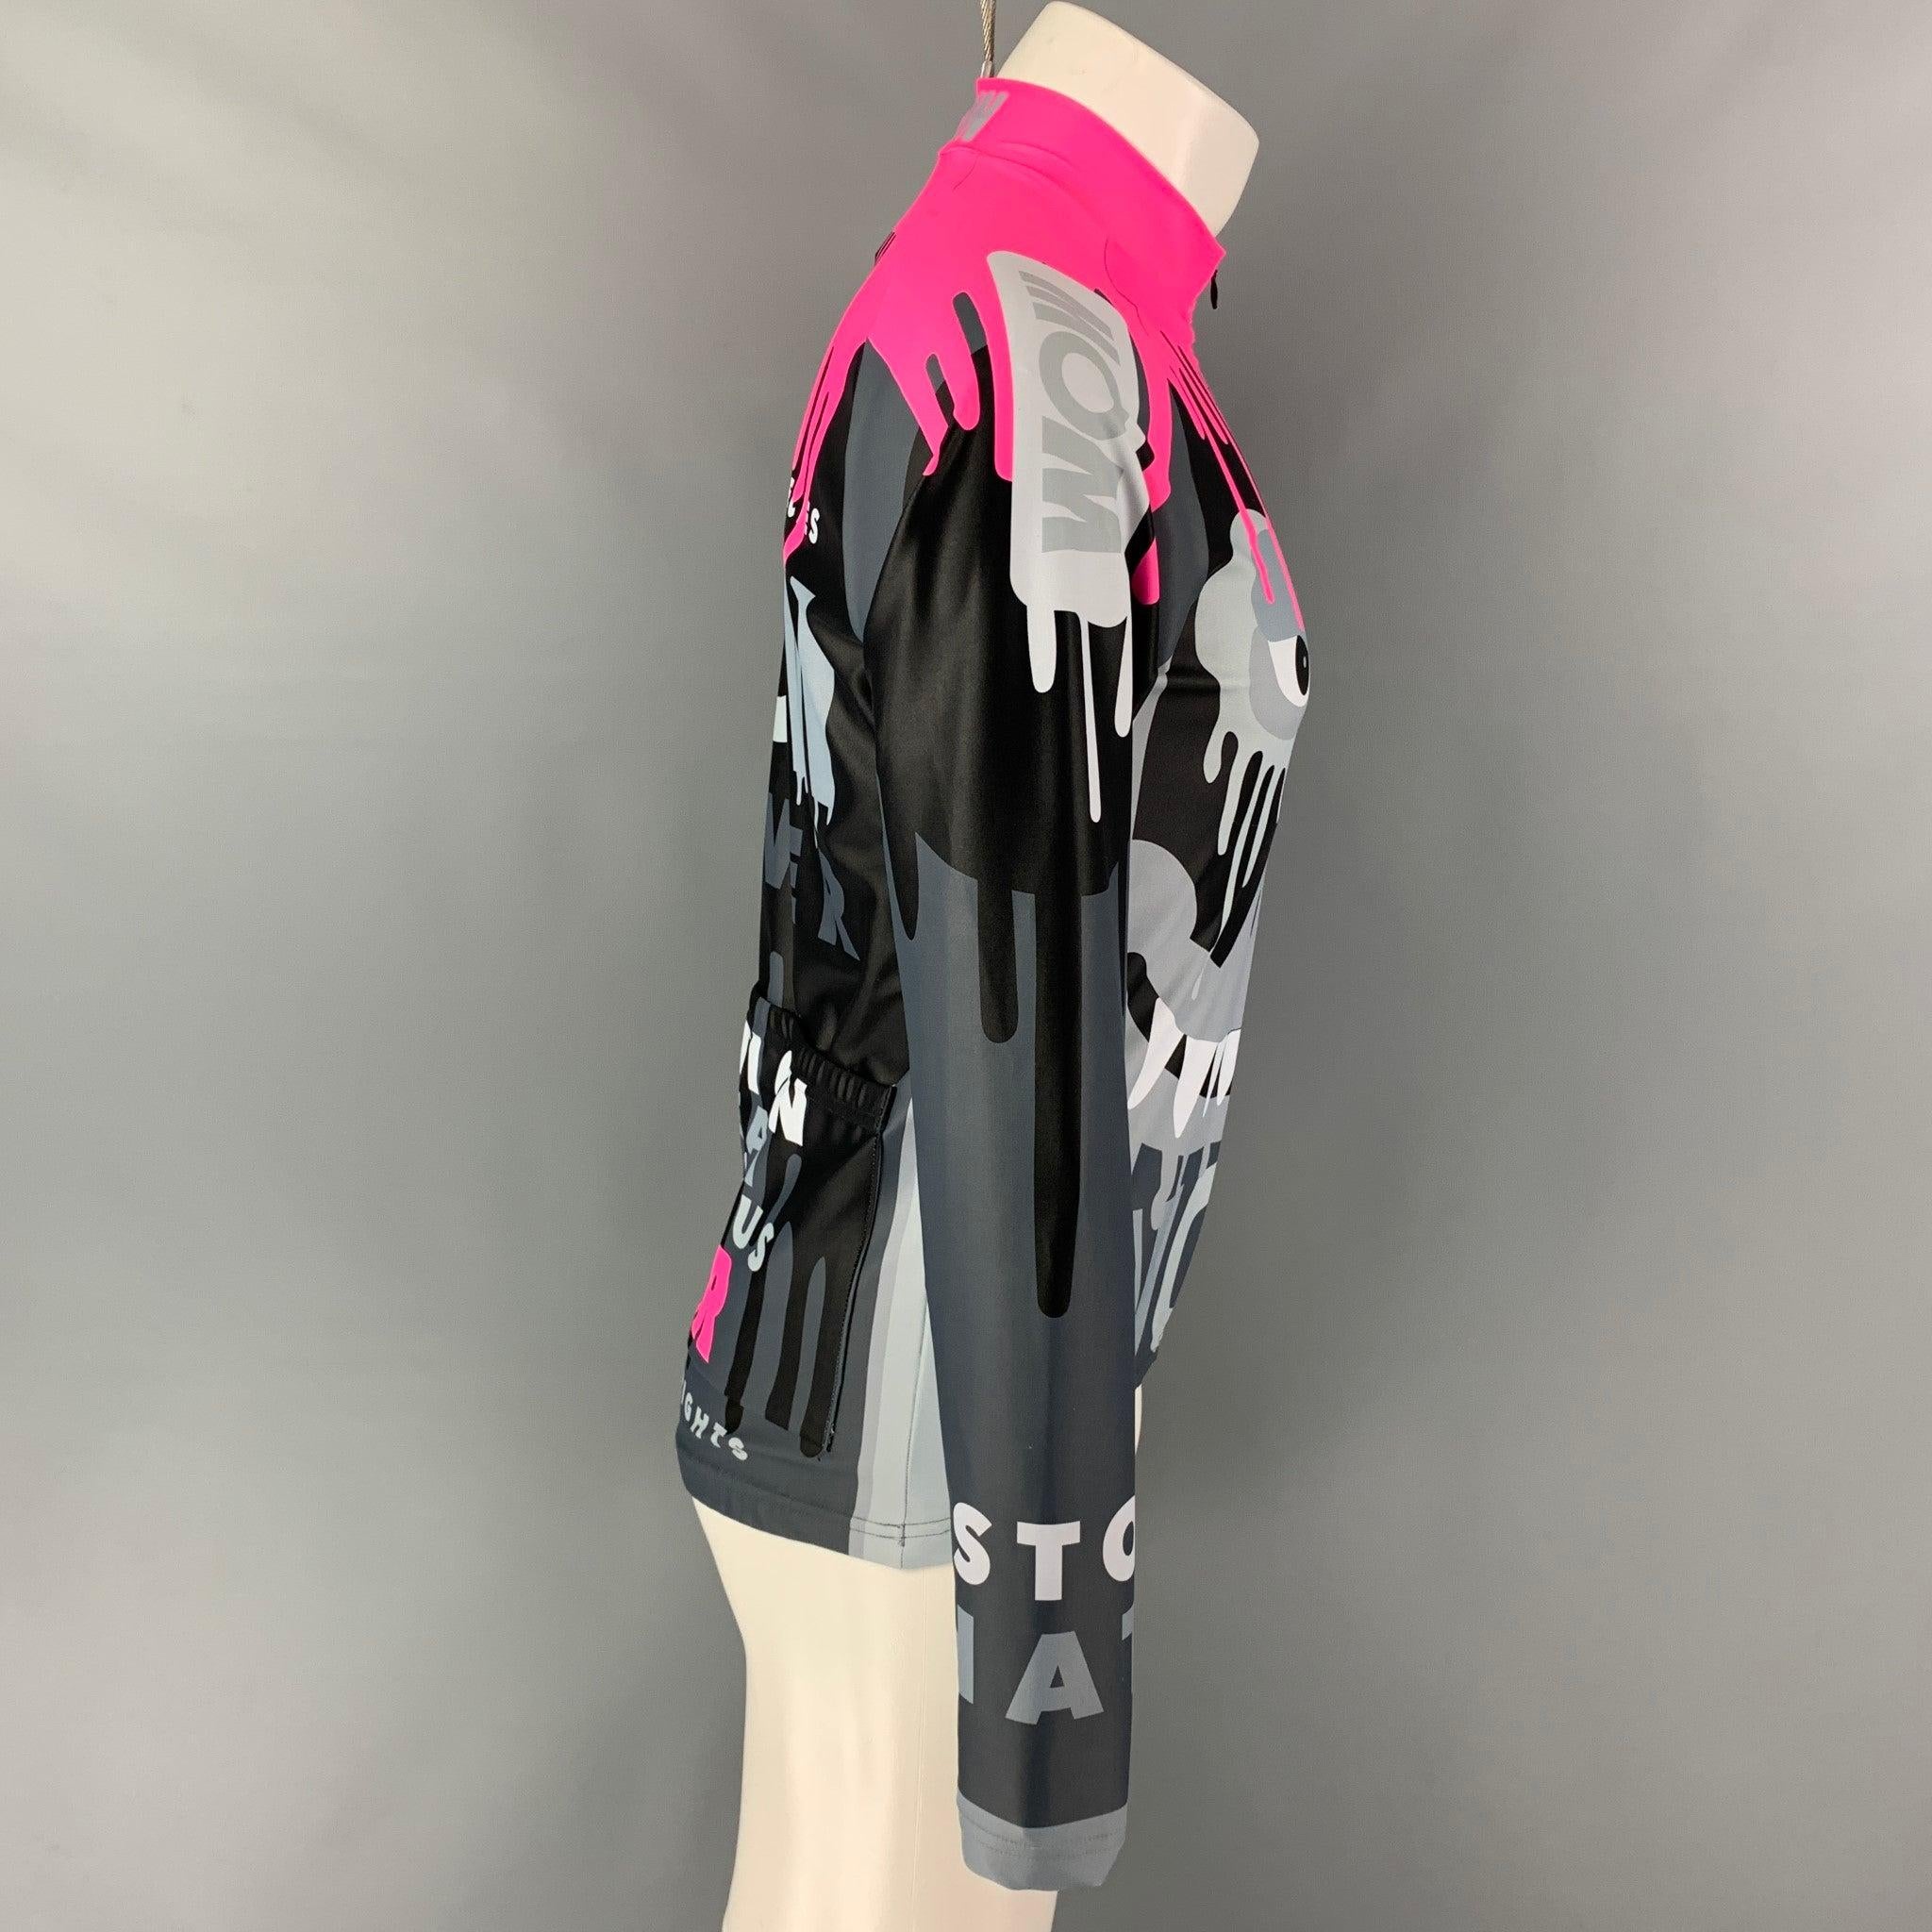 Walter Van Beirendonck Cycle Biker Jersey Pullover Top from Fall Winter 2019 WOW collection. Features a stretch material quarter zip graphic print design, collar and back pockets.Introduced as part of Walter Van Beirendonck’s W< collections during